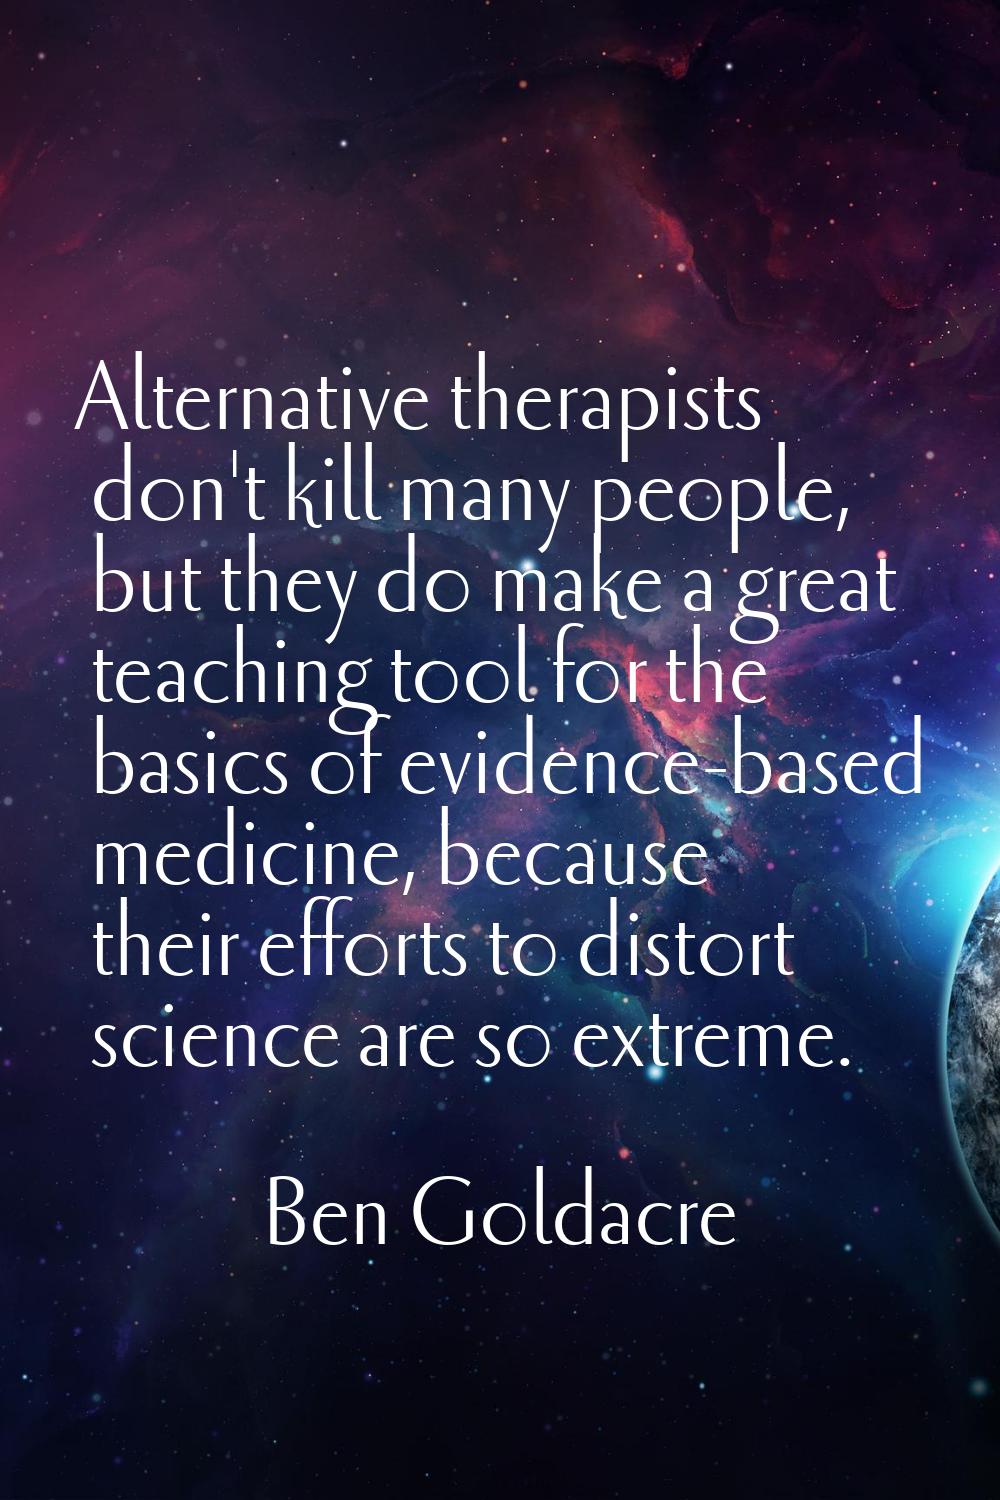 Alternative therapists don't kill many people, but they do make a great teaching tool for the basic